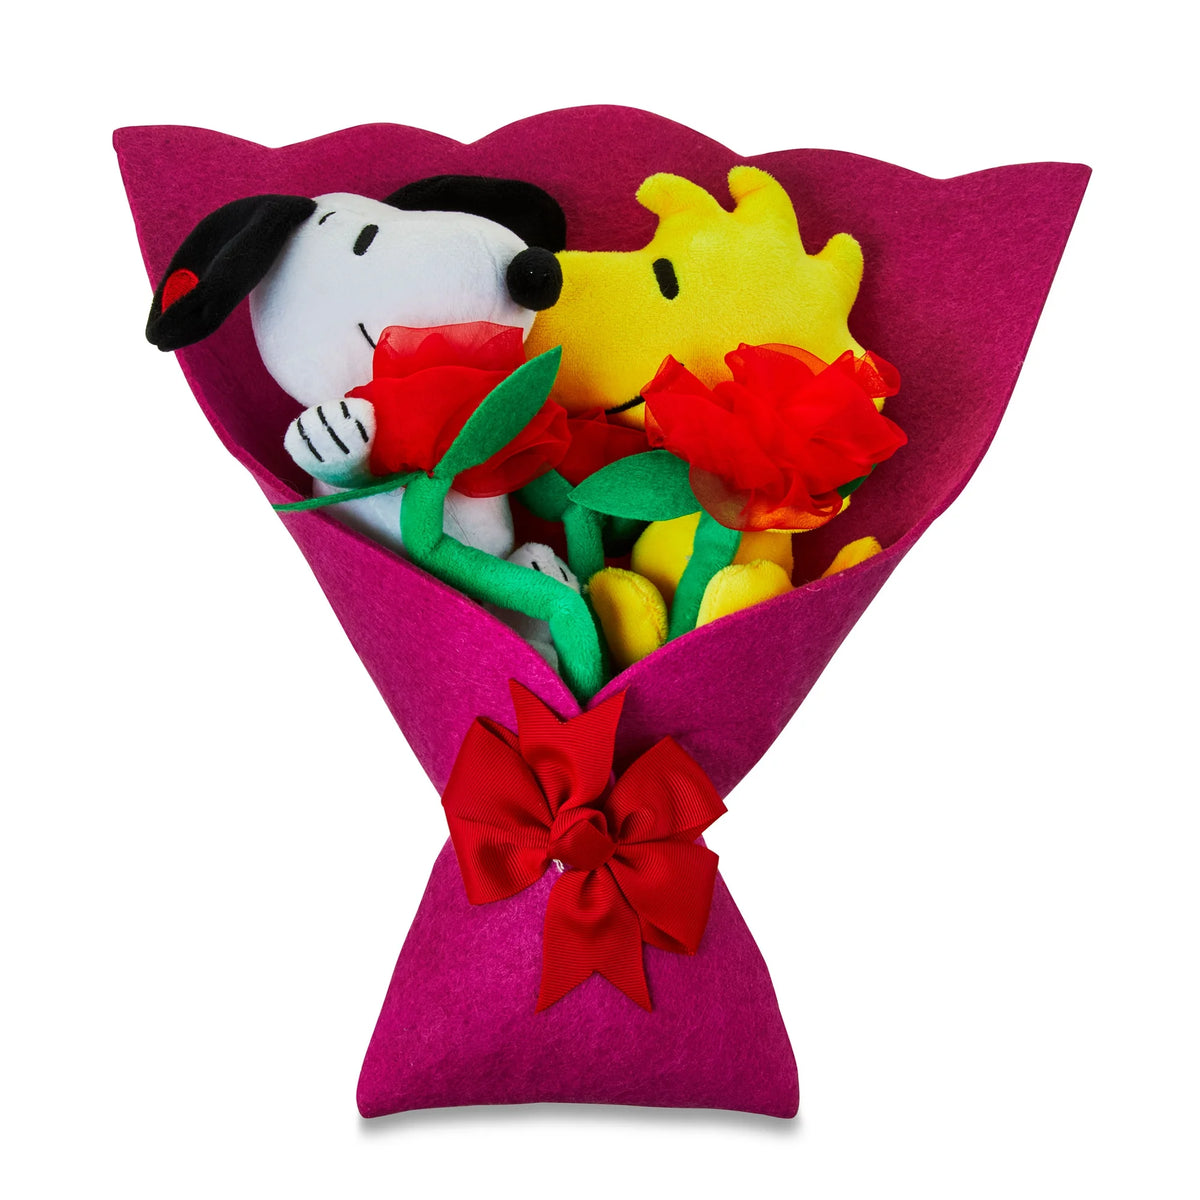 Peanuts, Snoopy and Woodstock Plush Valentine's Bouquet